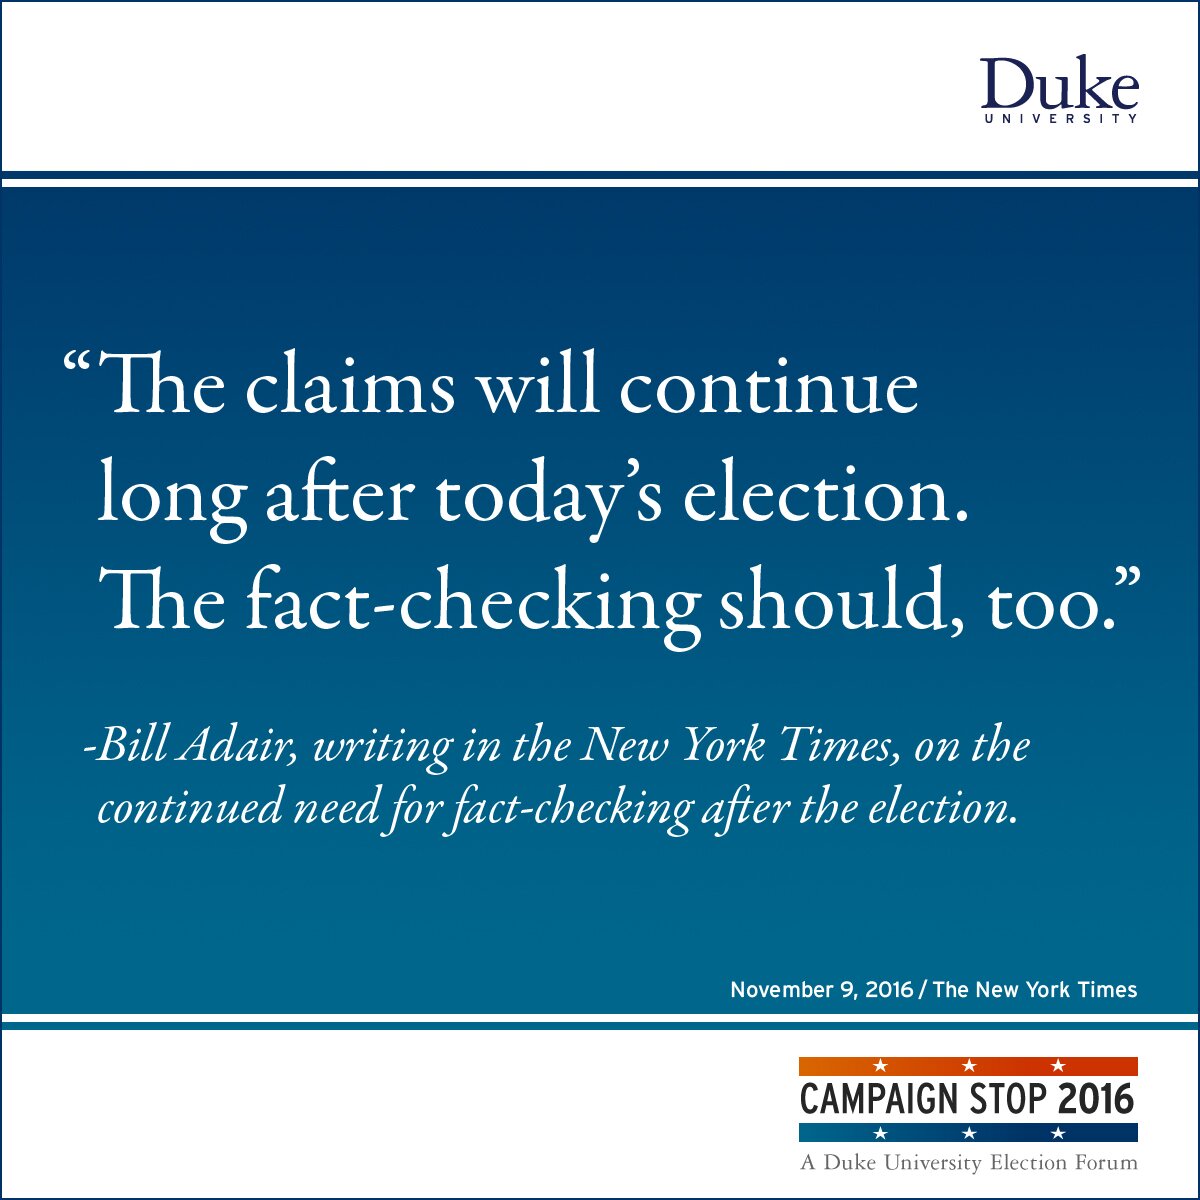 “The claims will continue long after today’s election. The fact-checking should, too.” -Bill Adair, writing in the New York Times, on the continued need for fact-checking after the election.